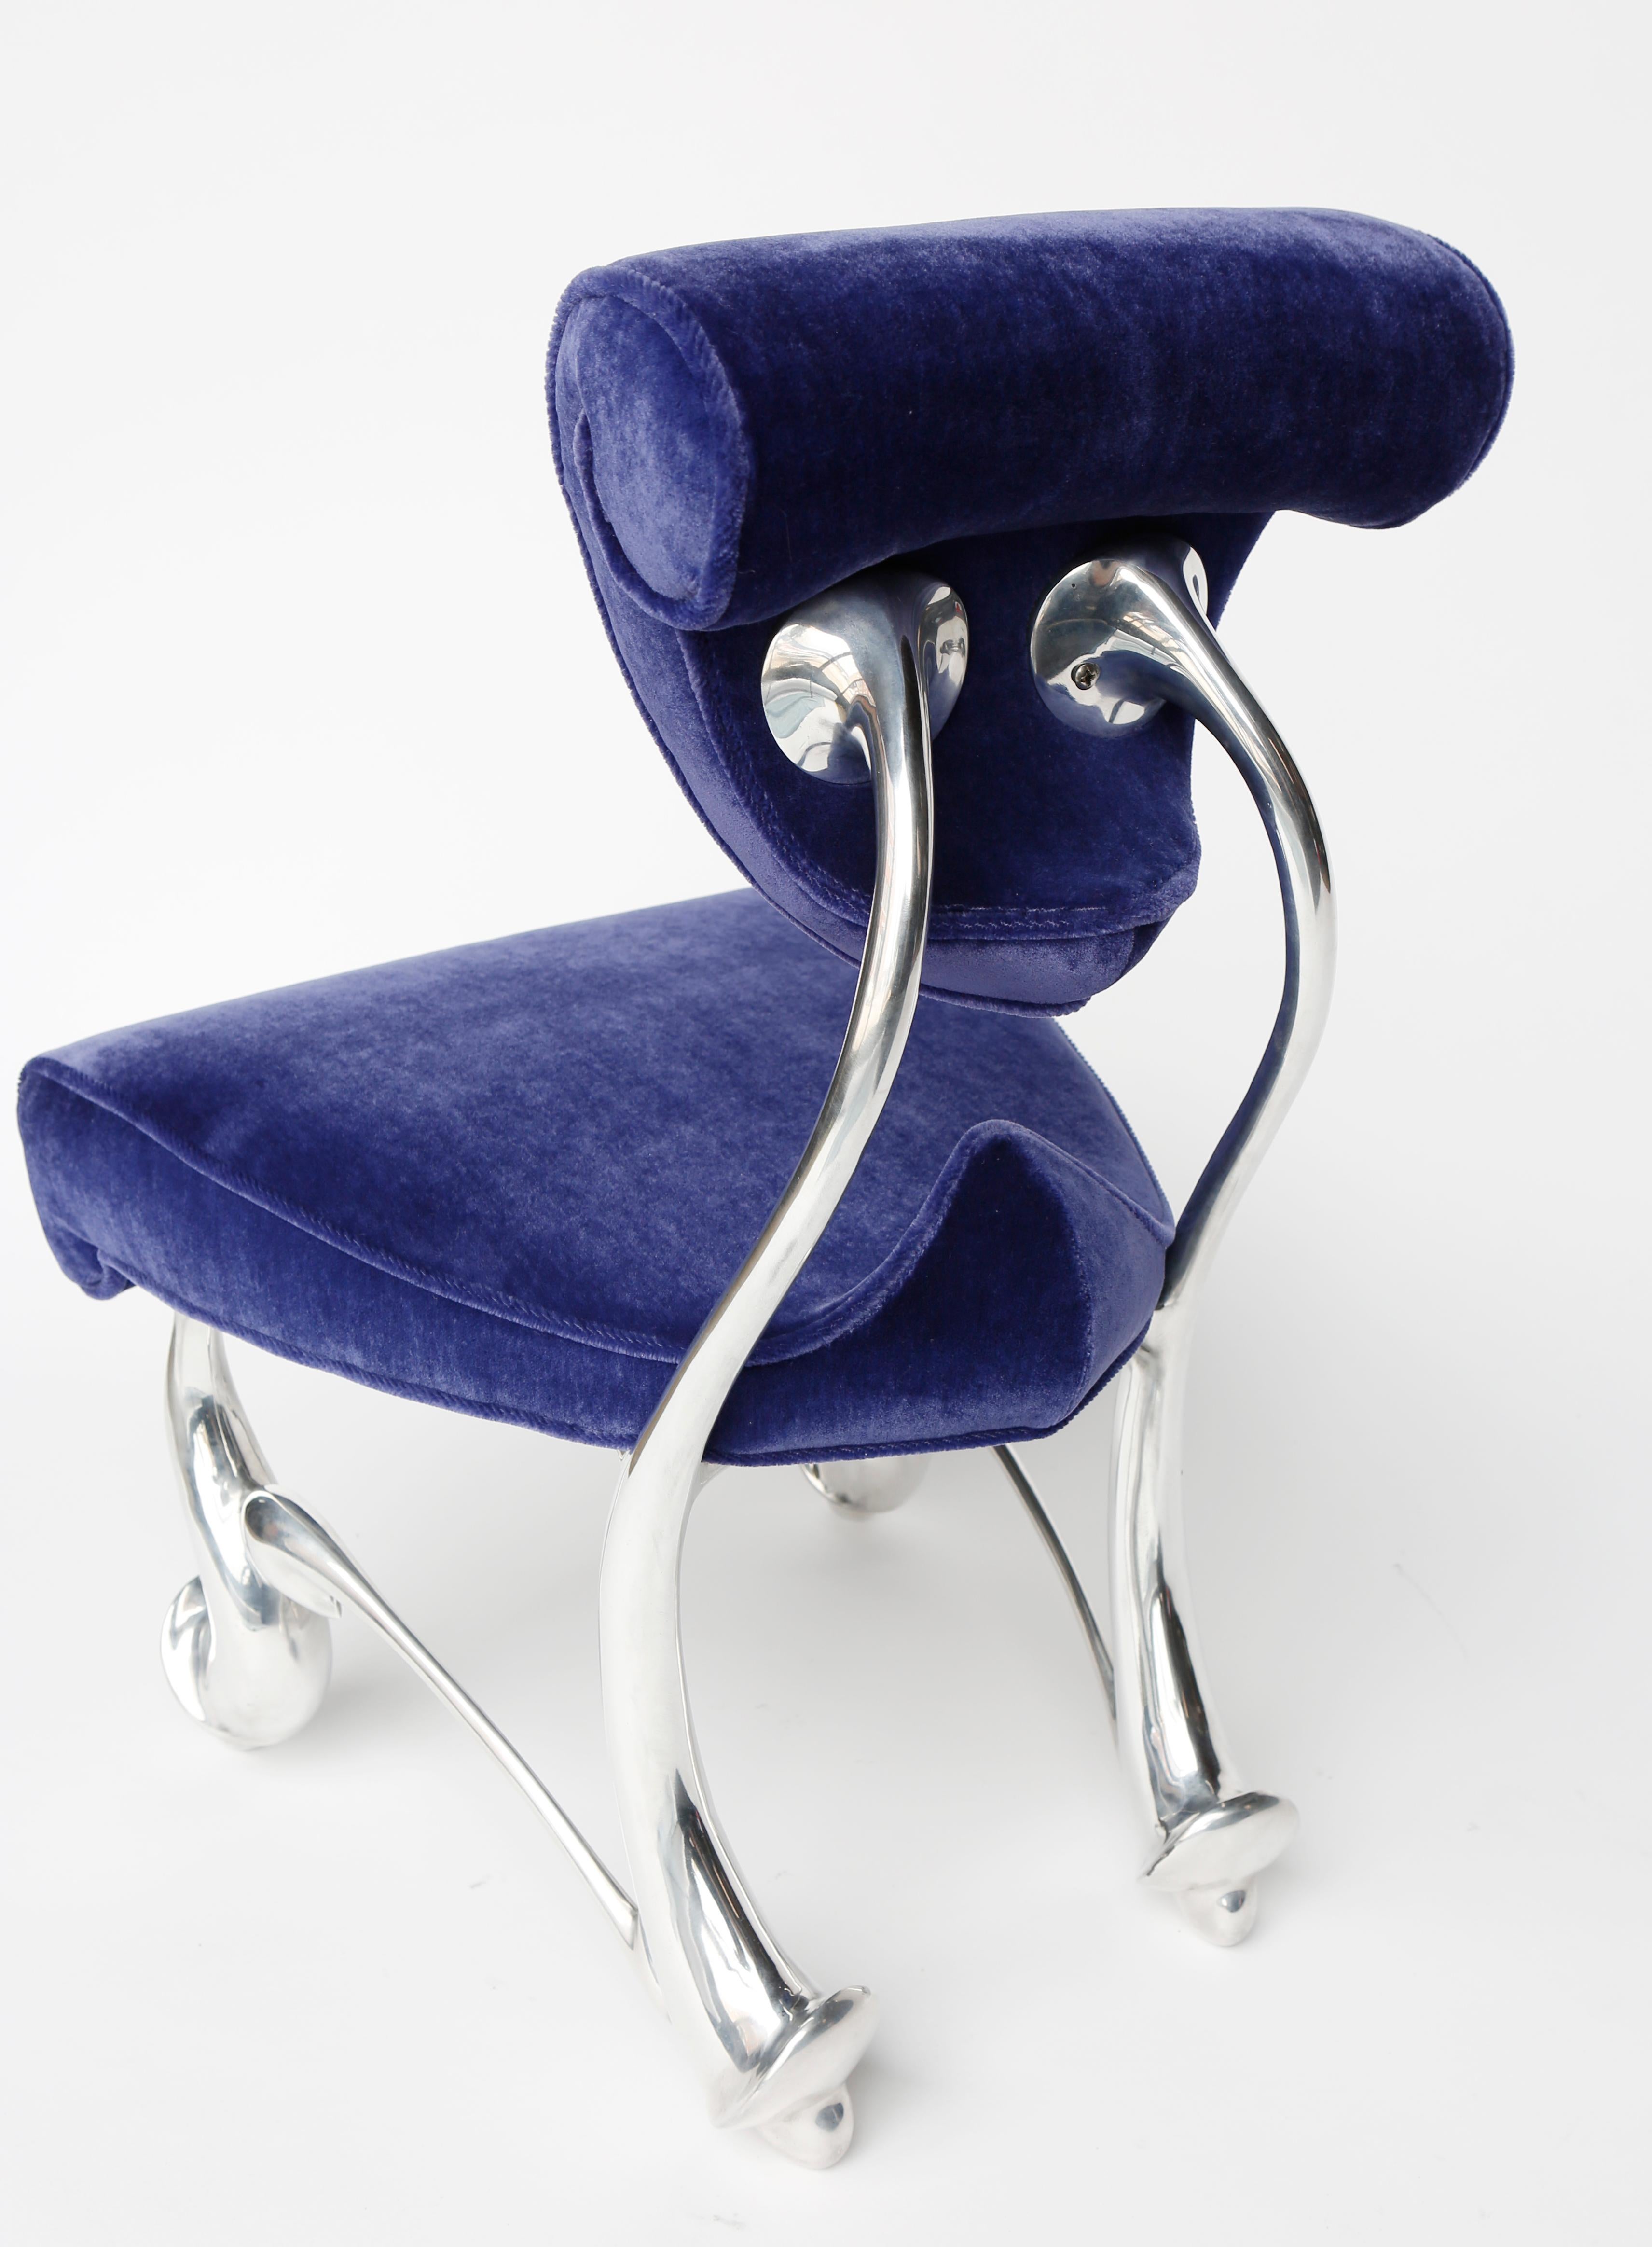 Children's Ballet Chair, Mohair and Cast Aluminum, Jordan Mozer, USA 1992-2018 In New Condition For Sale In Chicago, IL